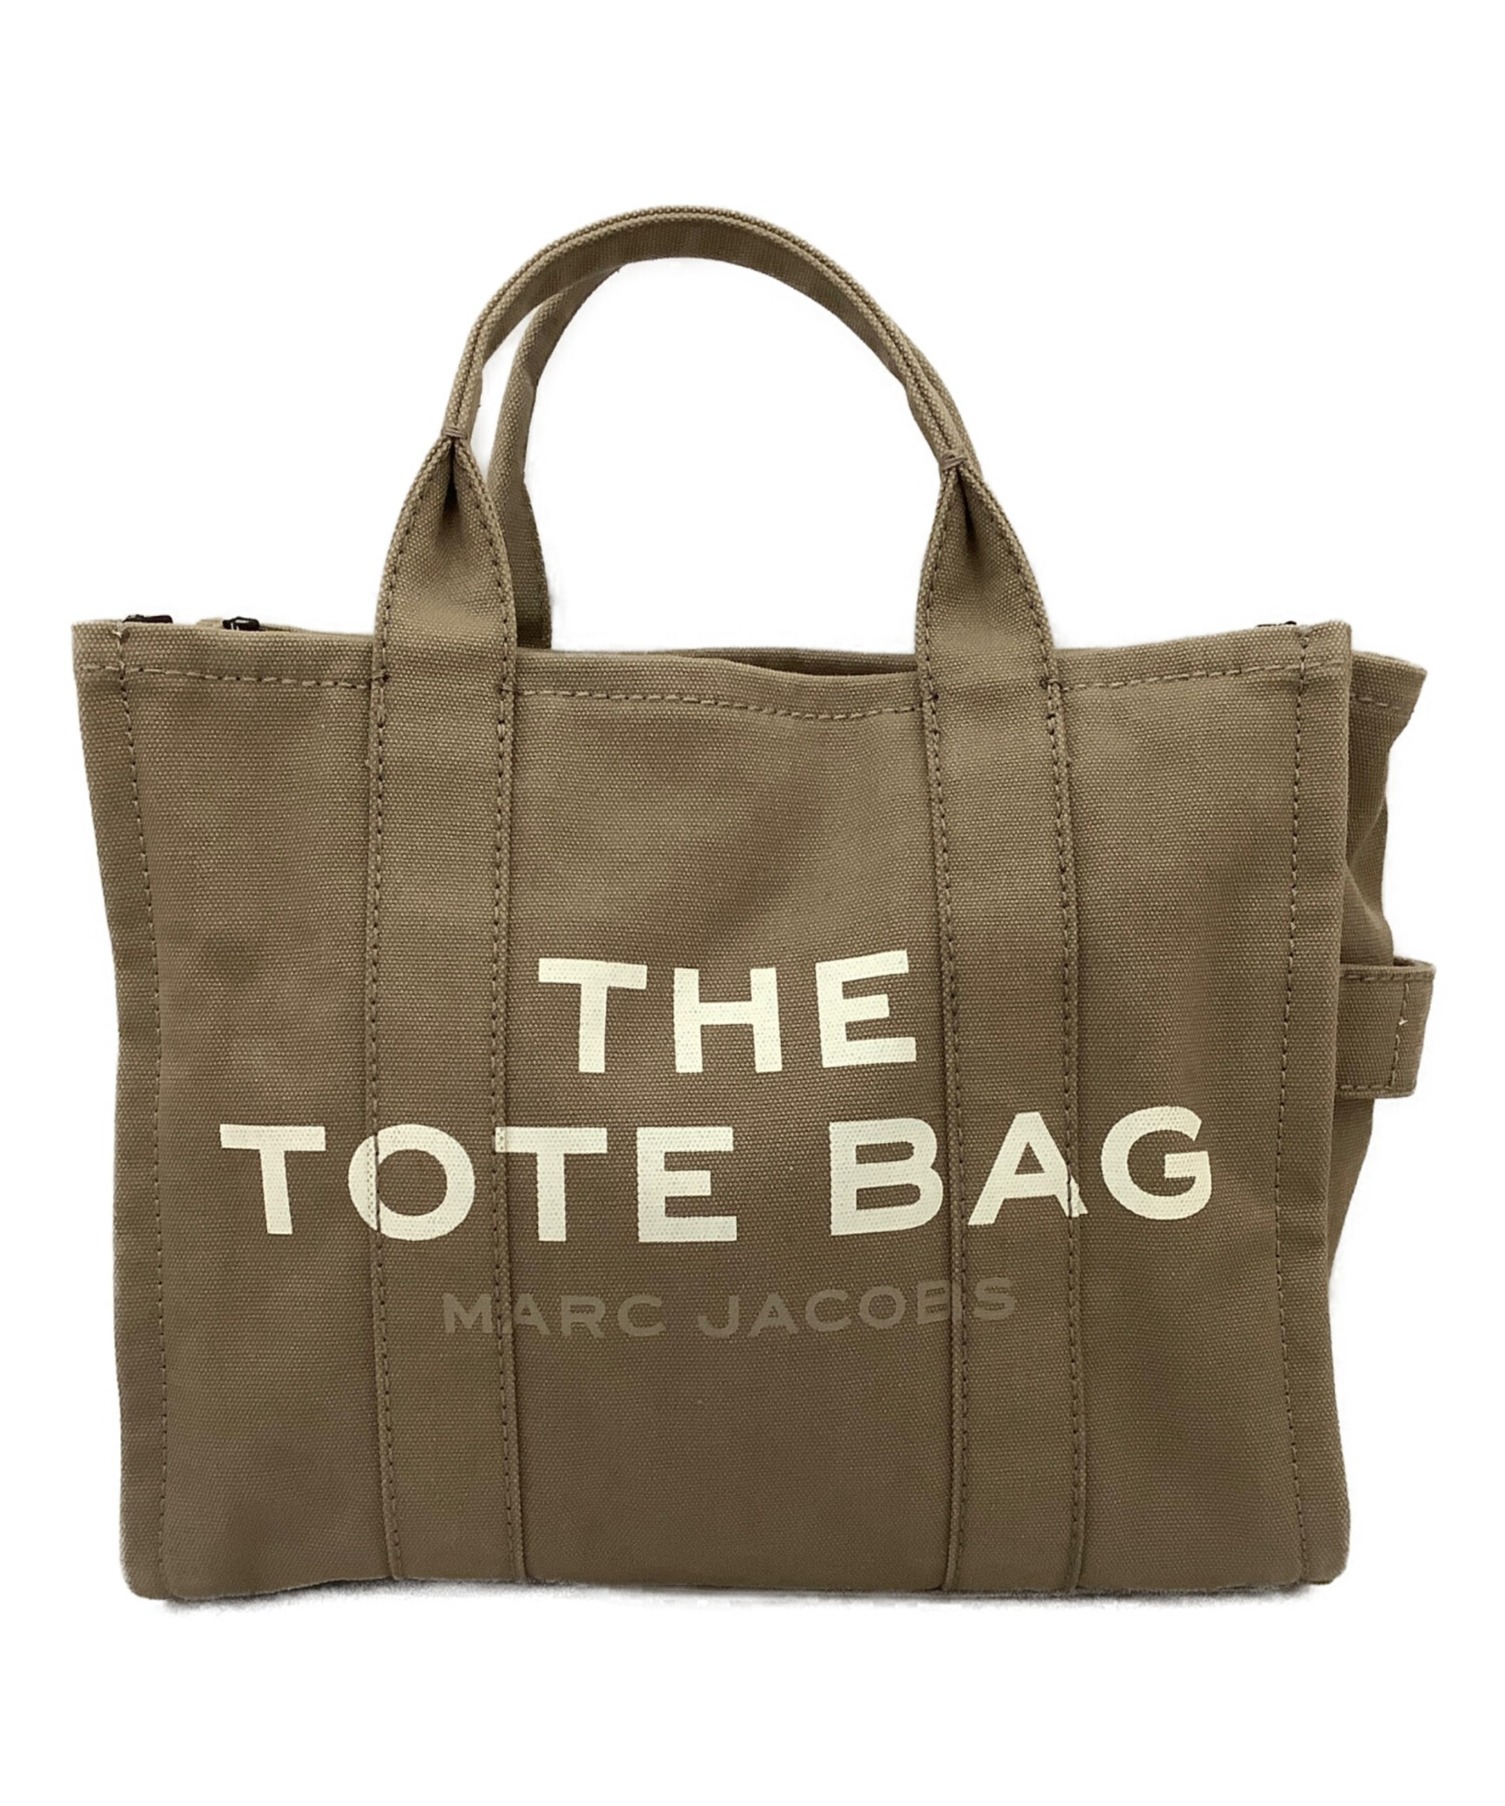 MARC JACOBS The Tote Bag トートバッグ-